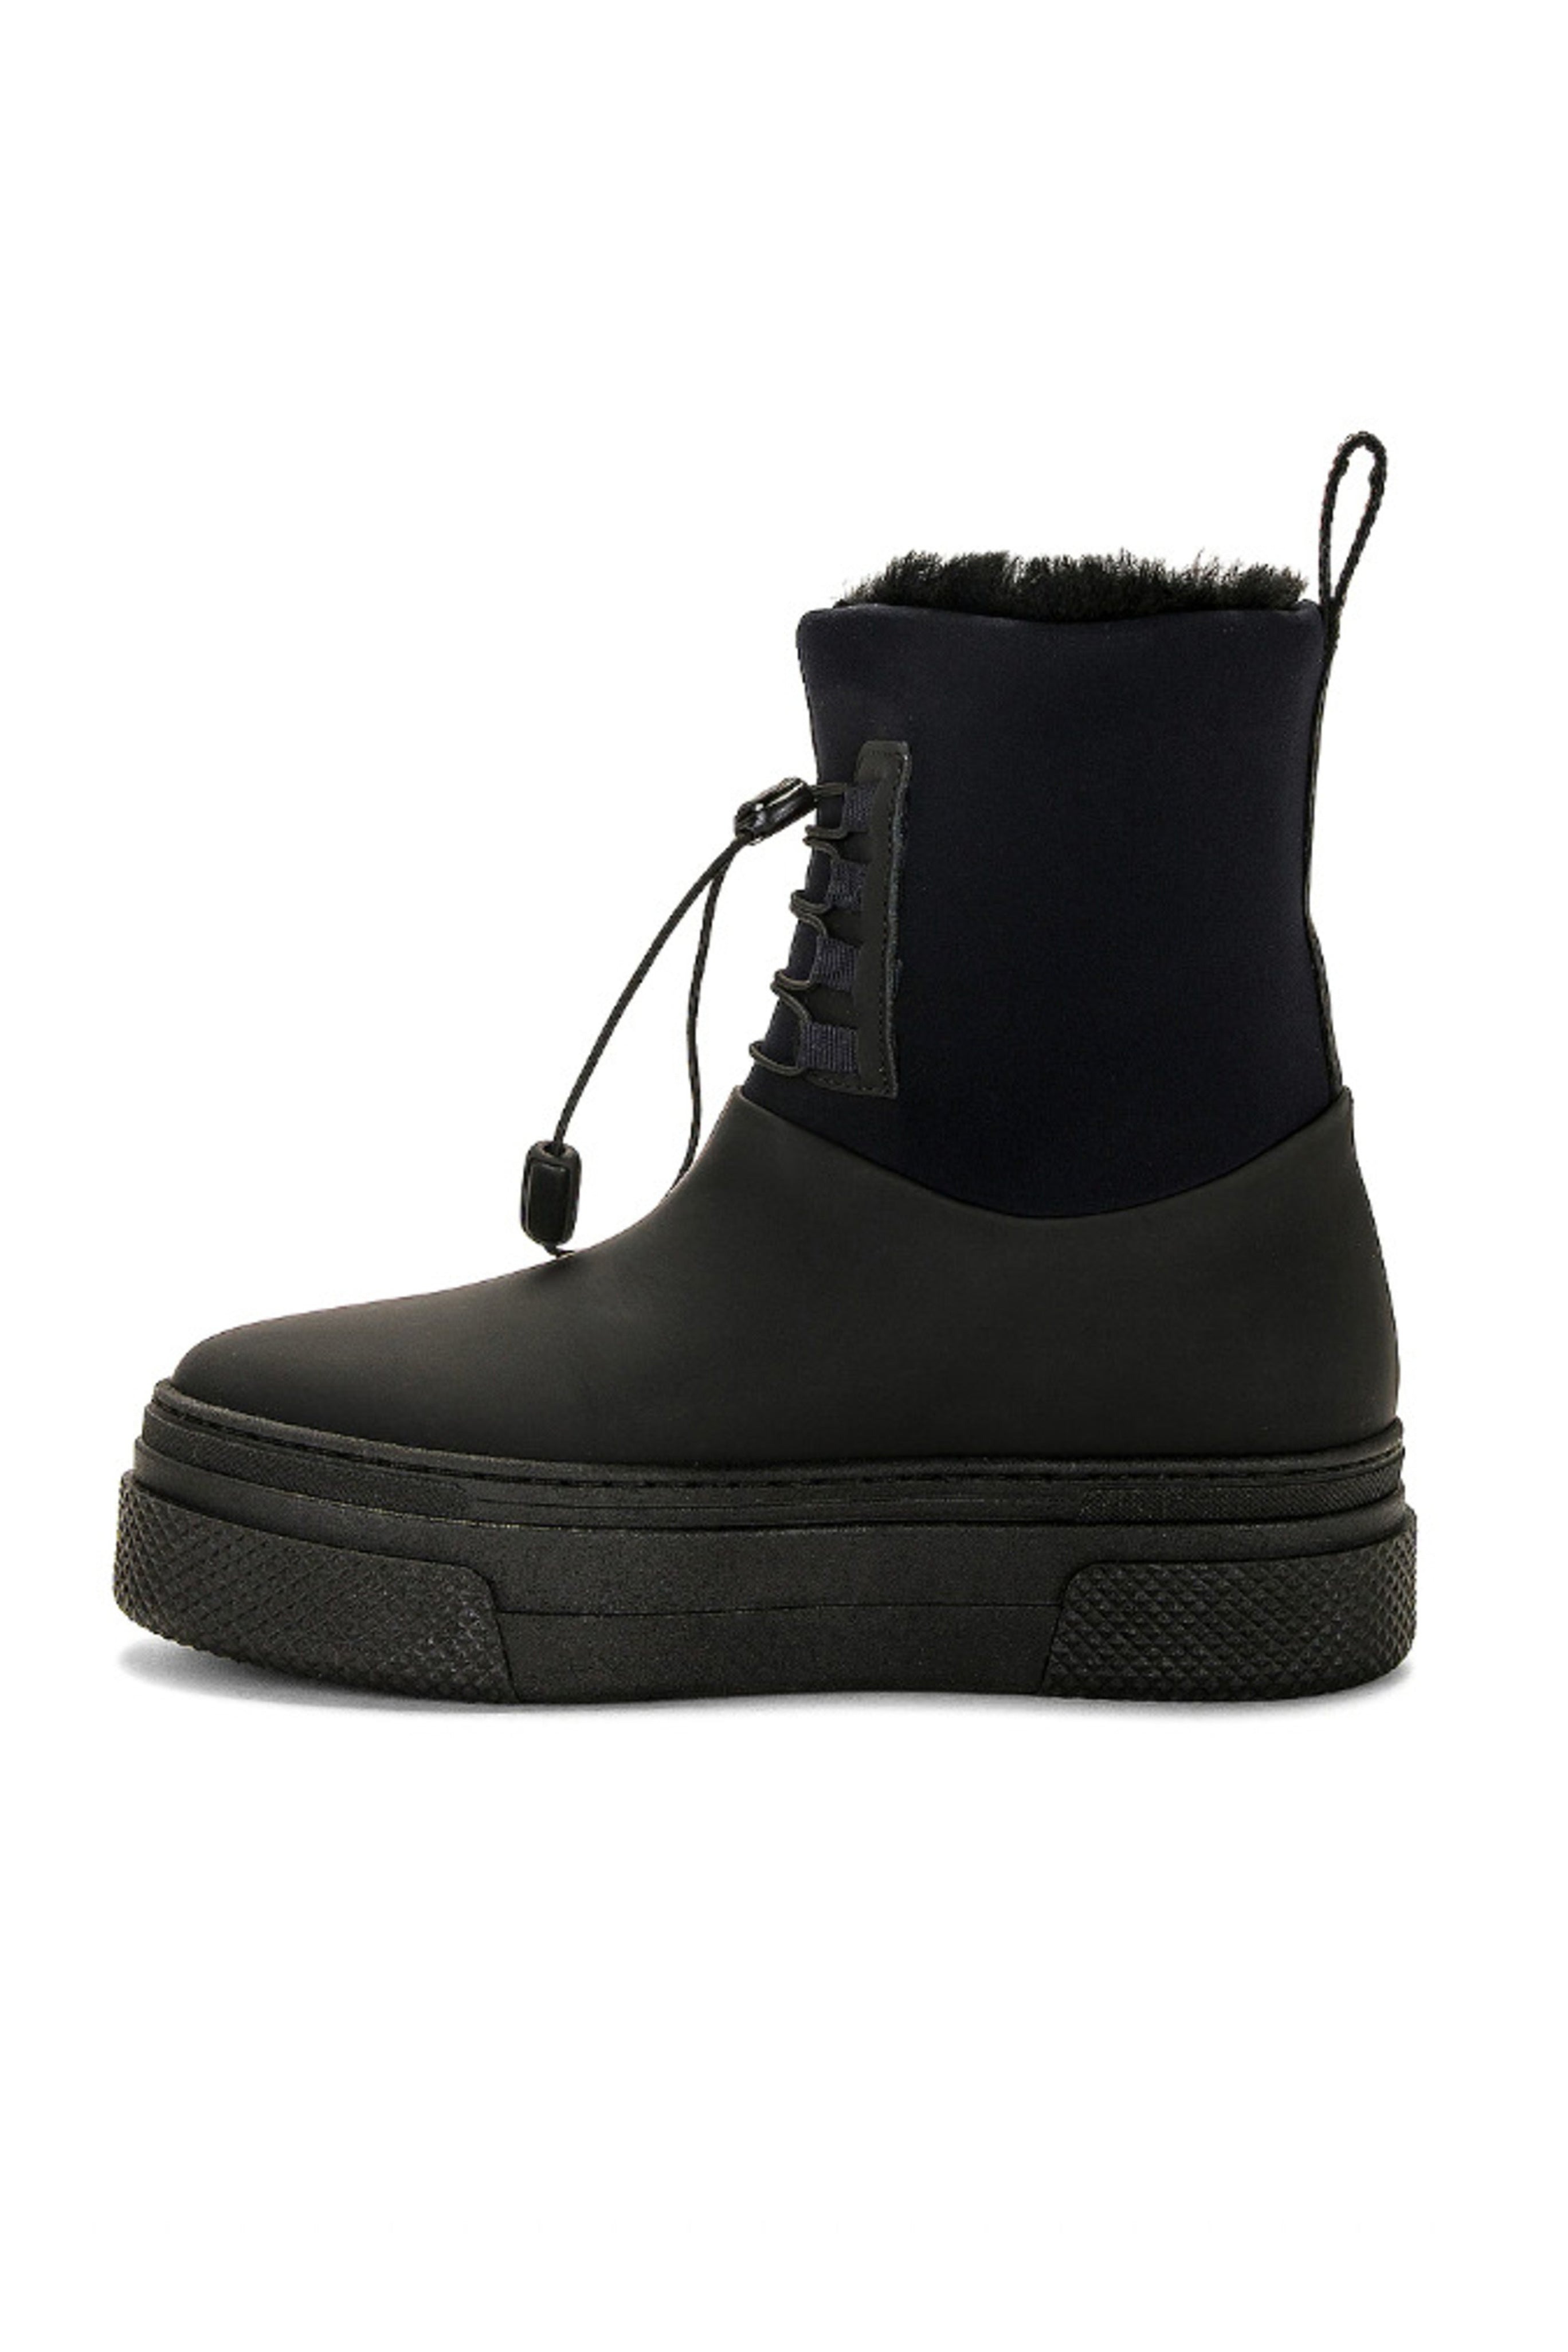 Culver Shearling Boots